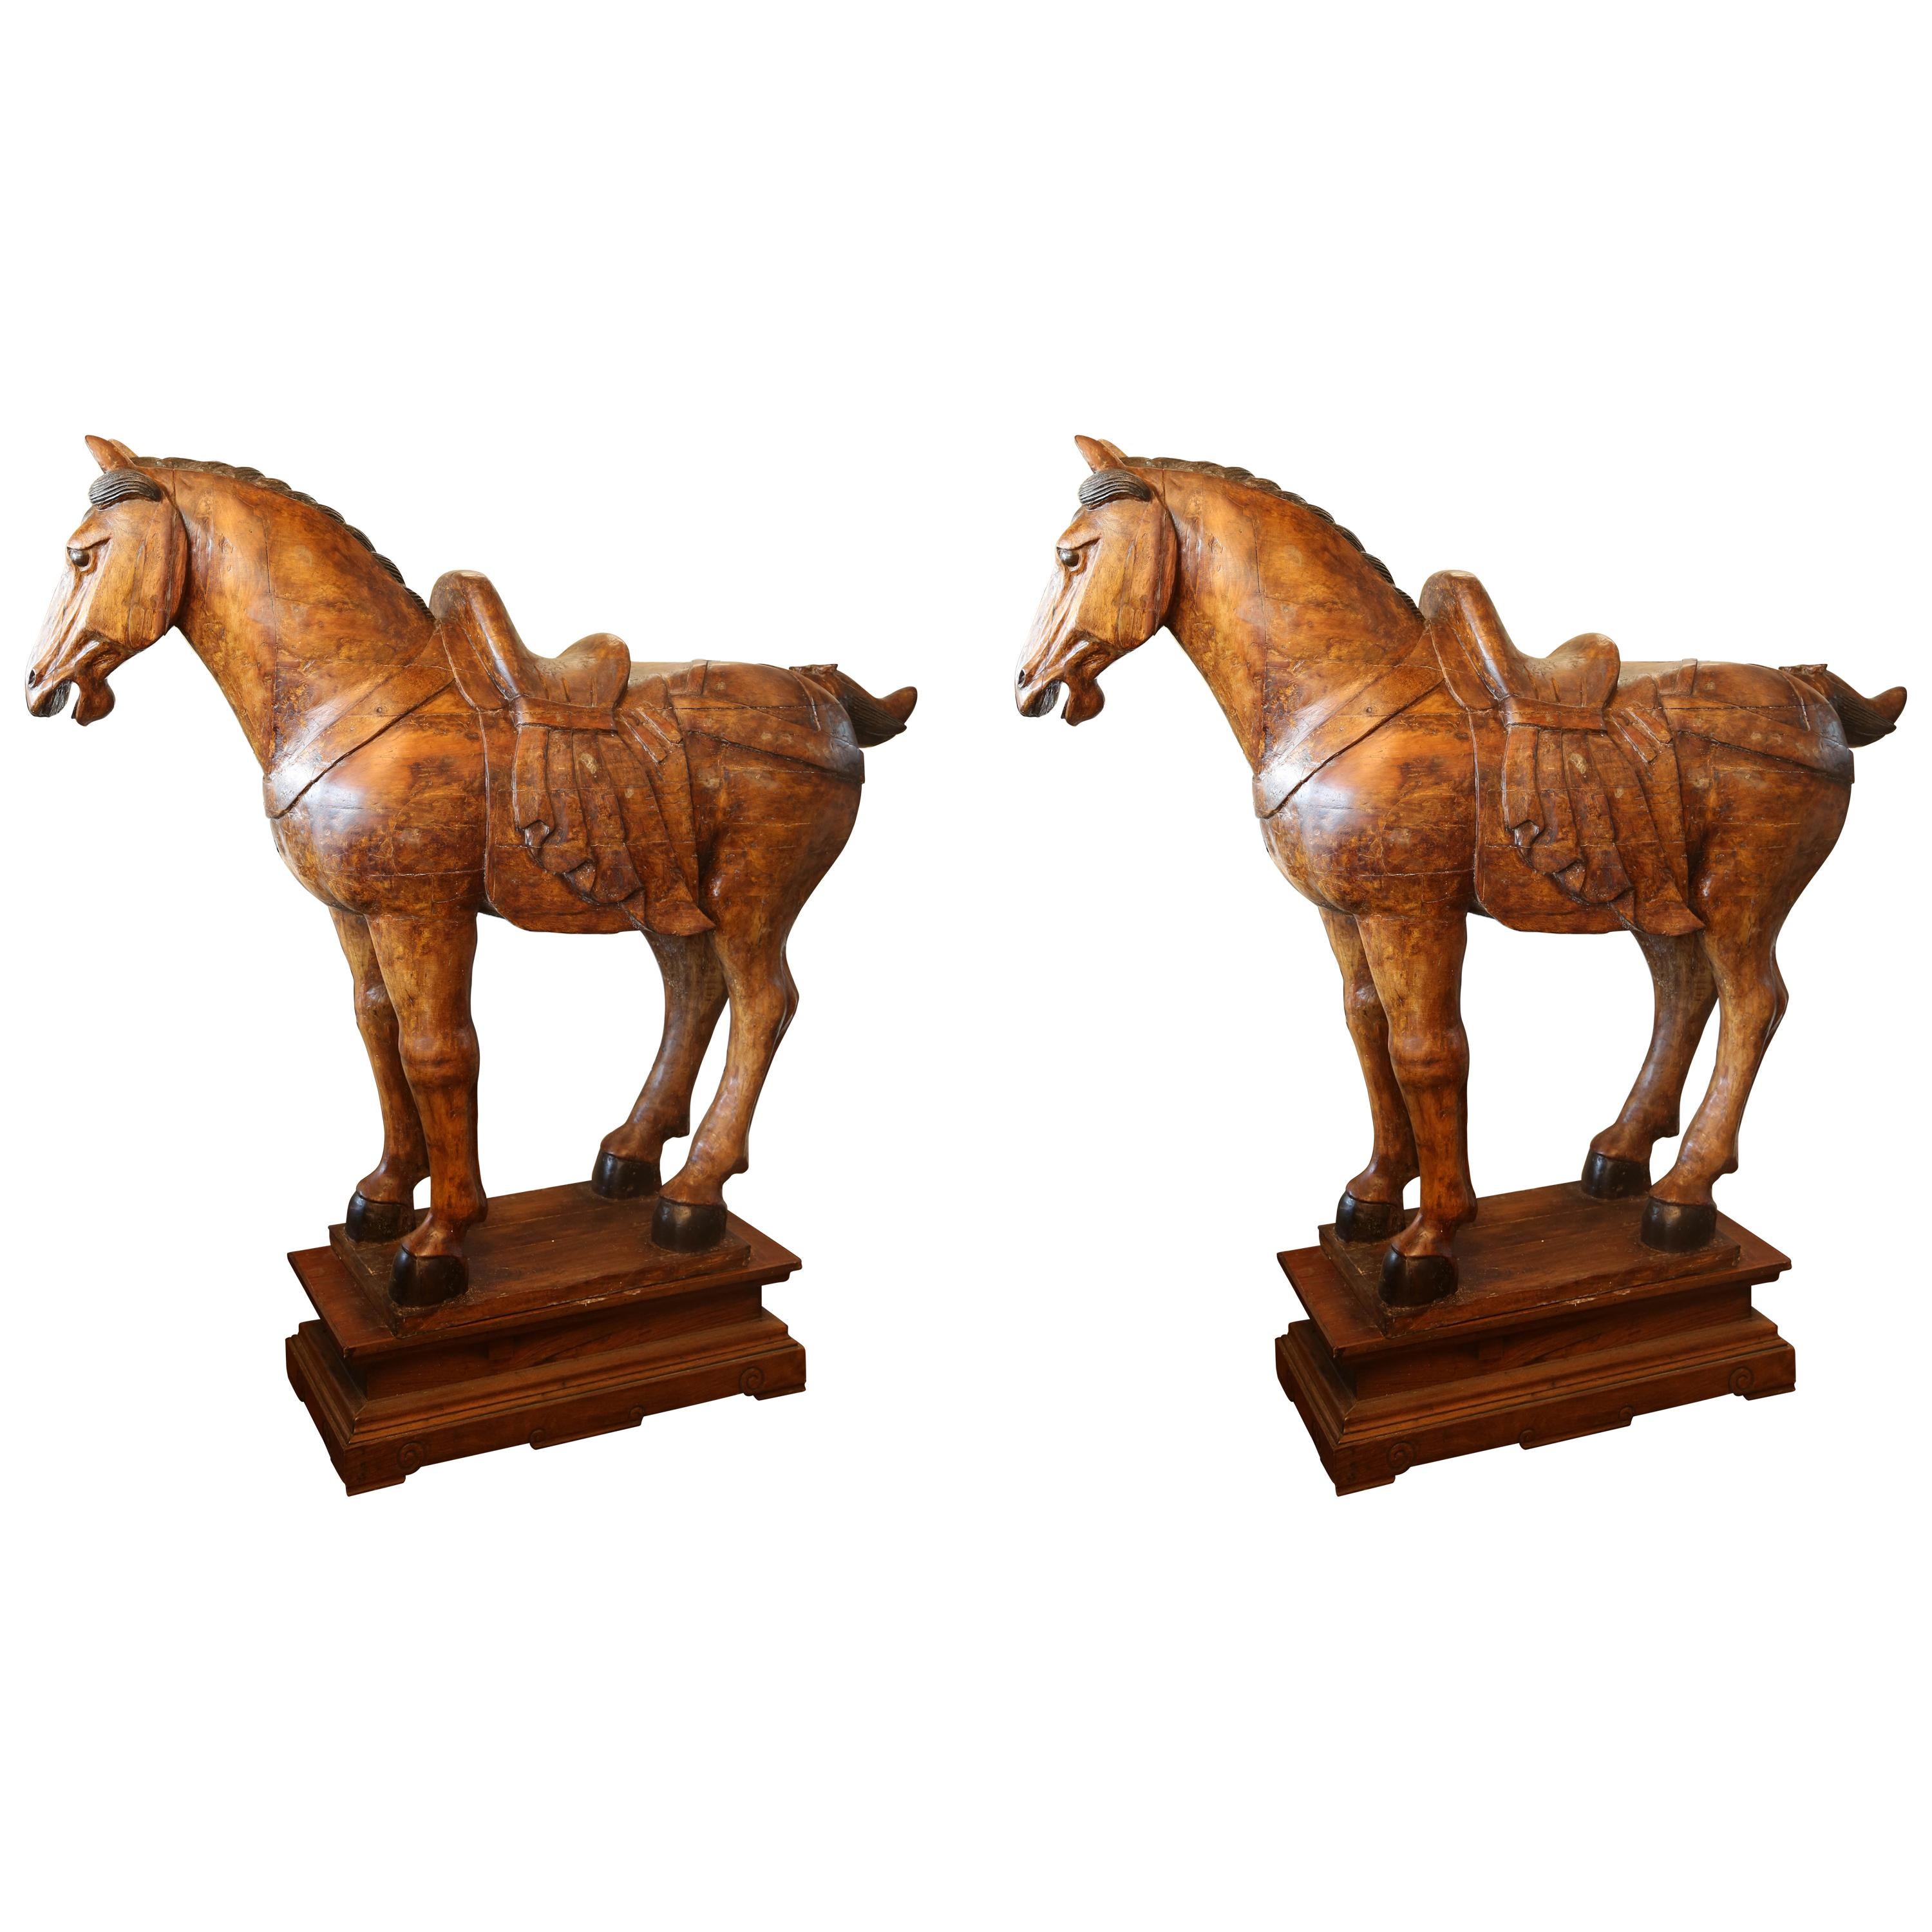 Pair of Wooden Mongolian Horses Lifesize Ching Dynasty, Late 20th Century For Sale